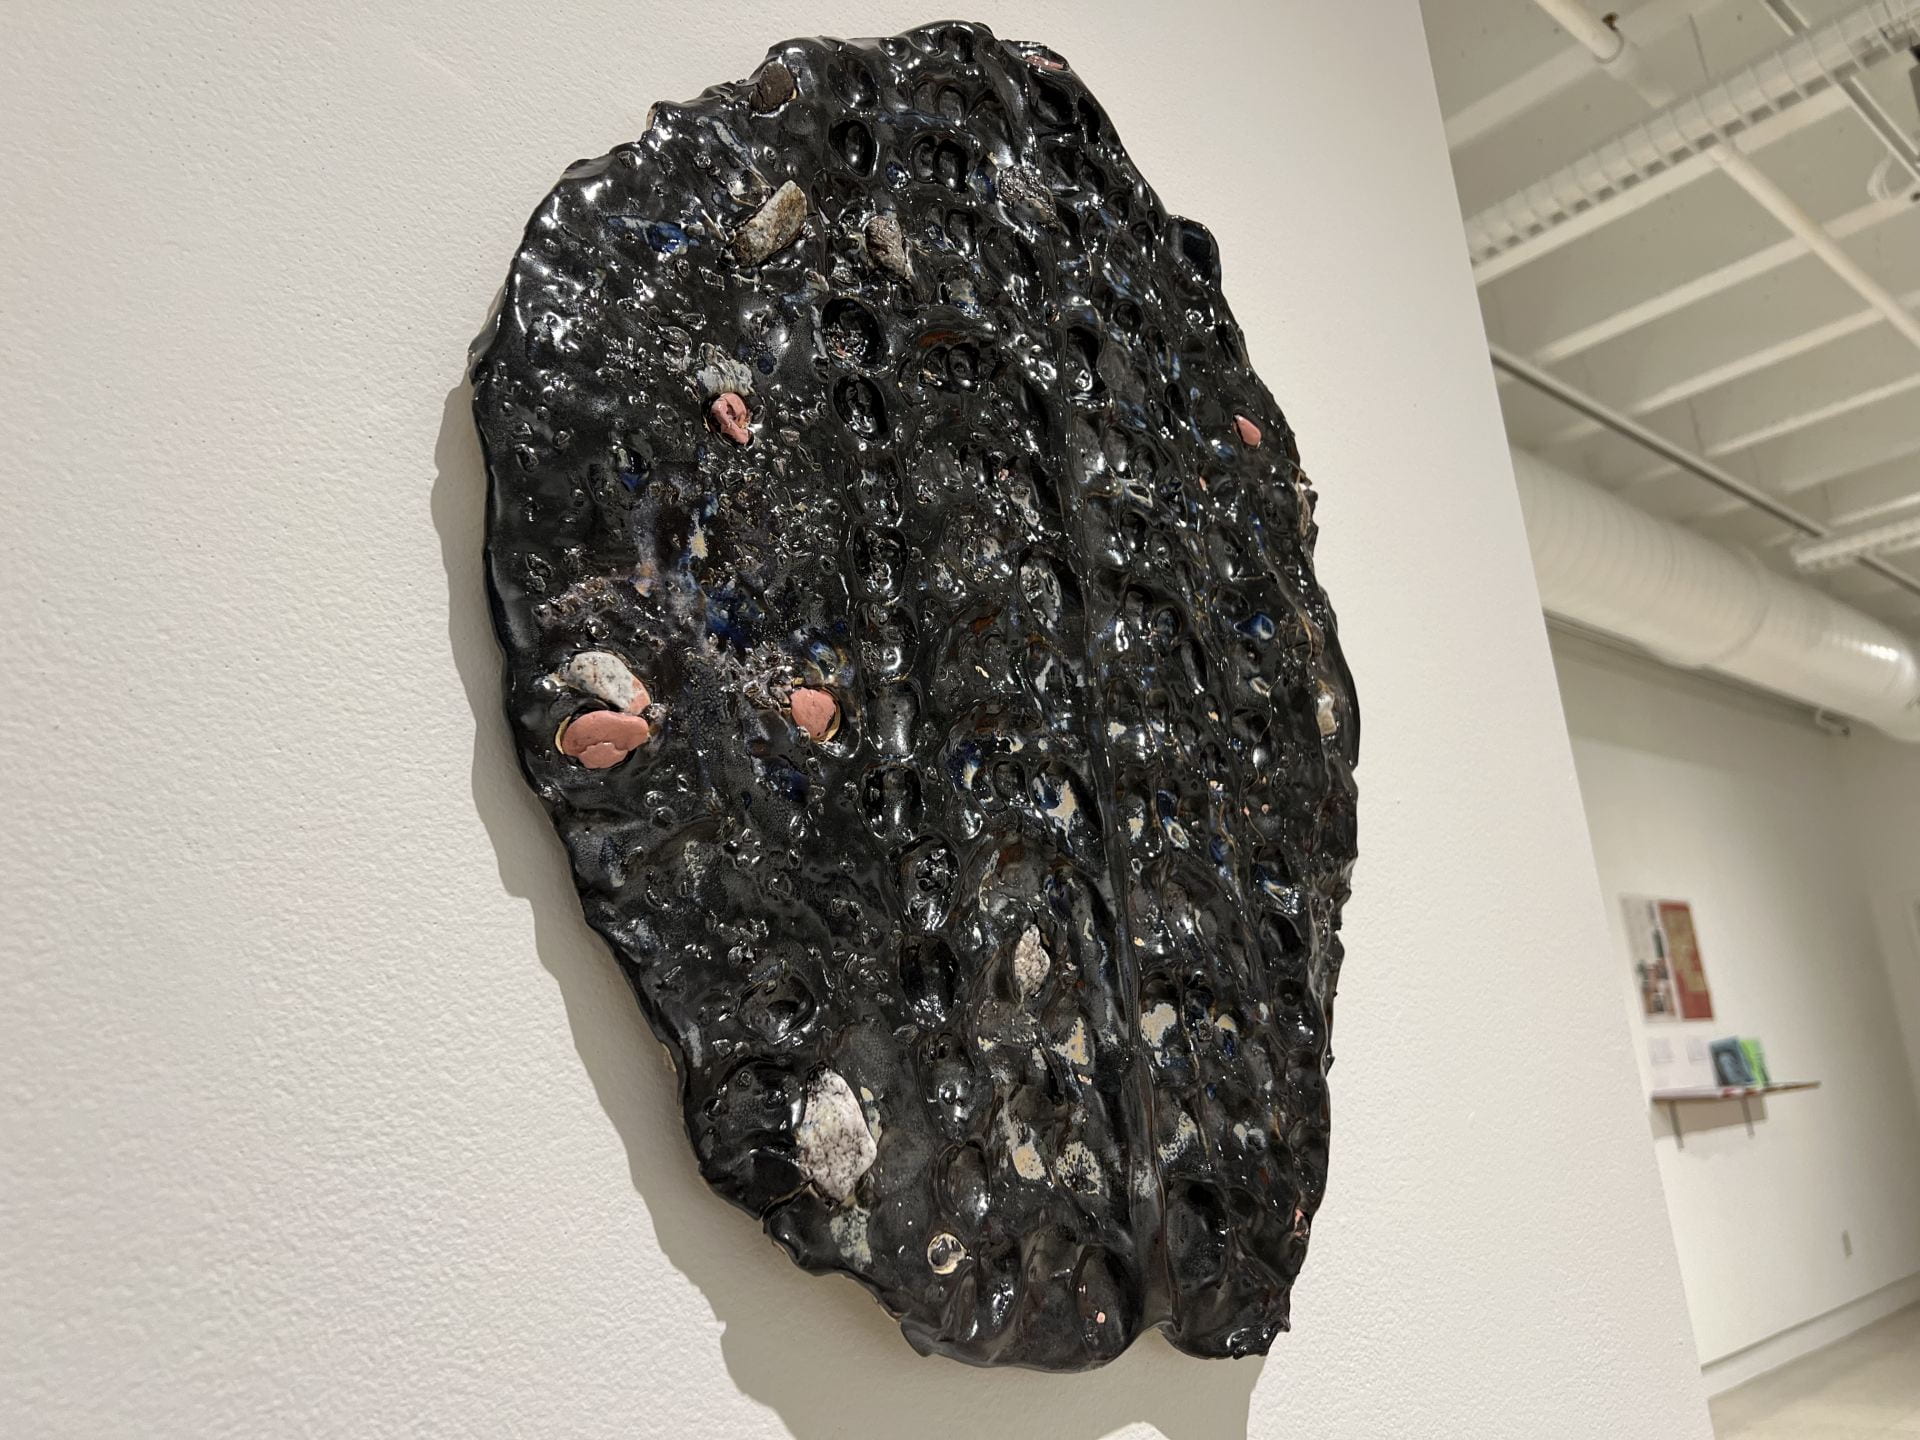 An untitled ceramic piece by first-year Master of Fine Arts student Omni Estabrook is on display at 